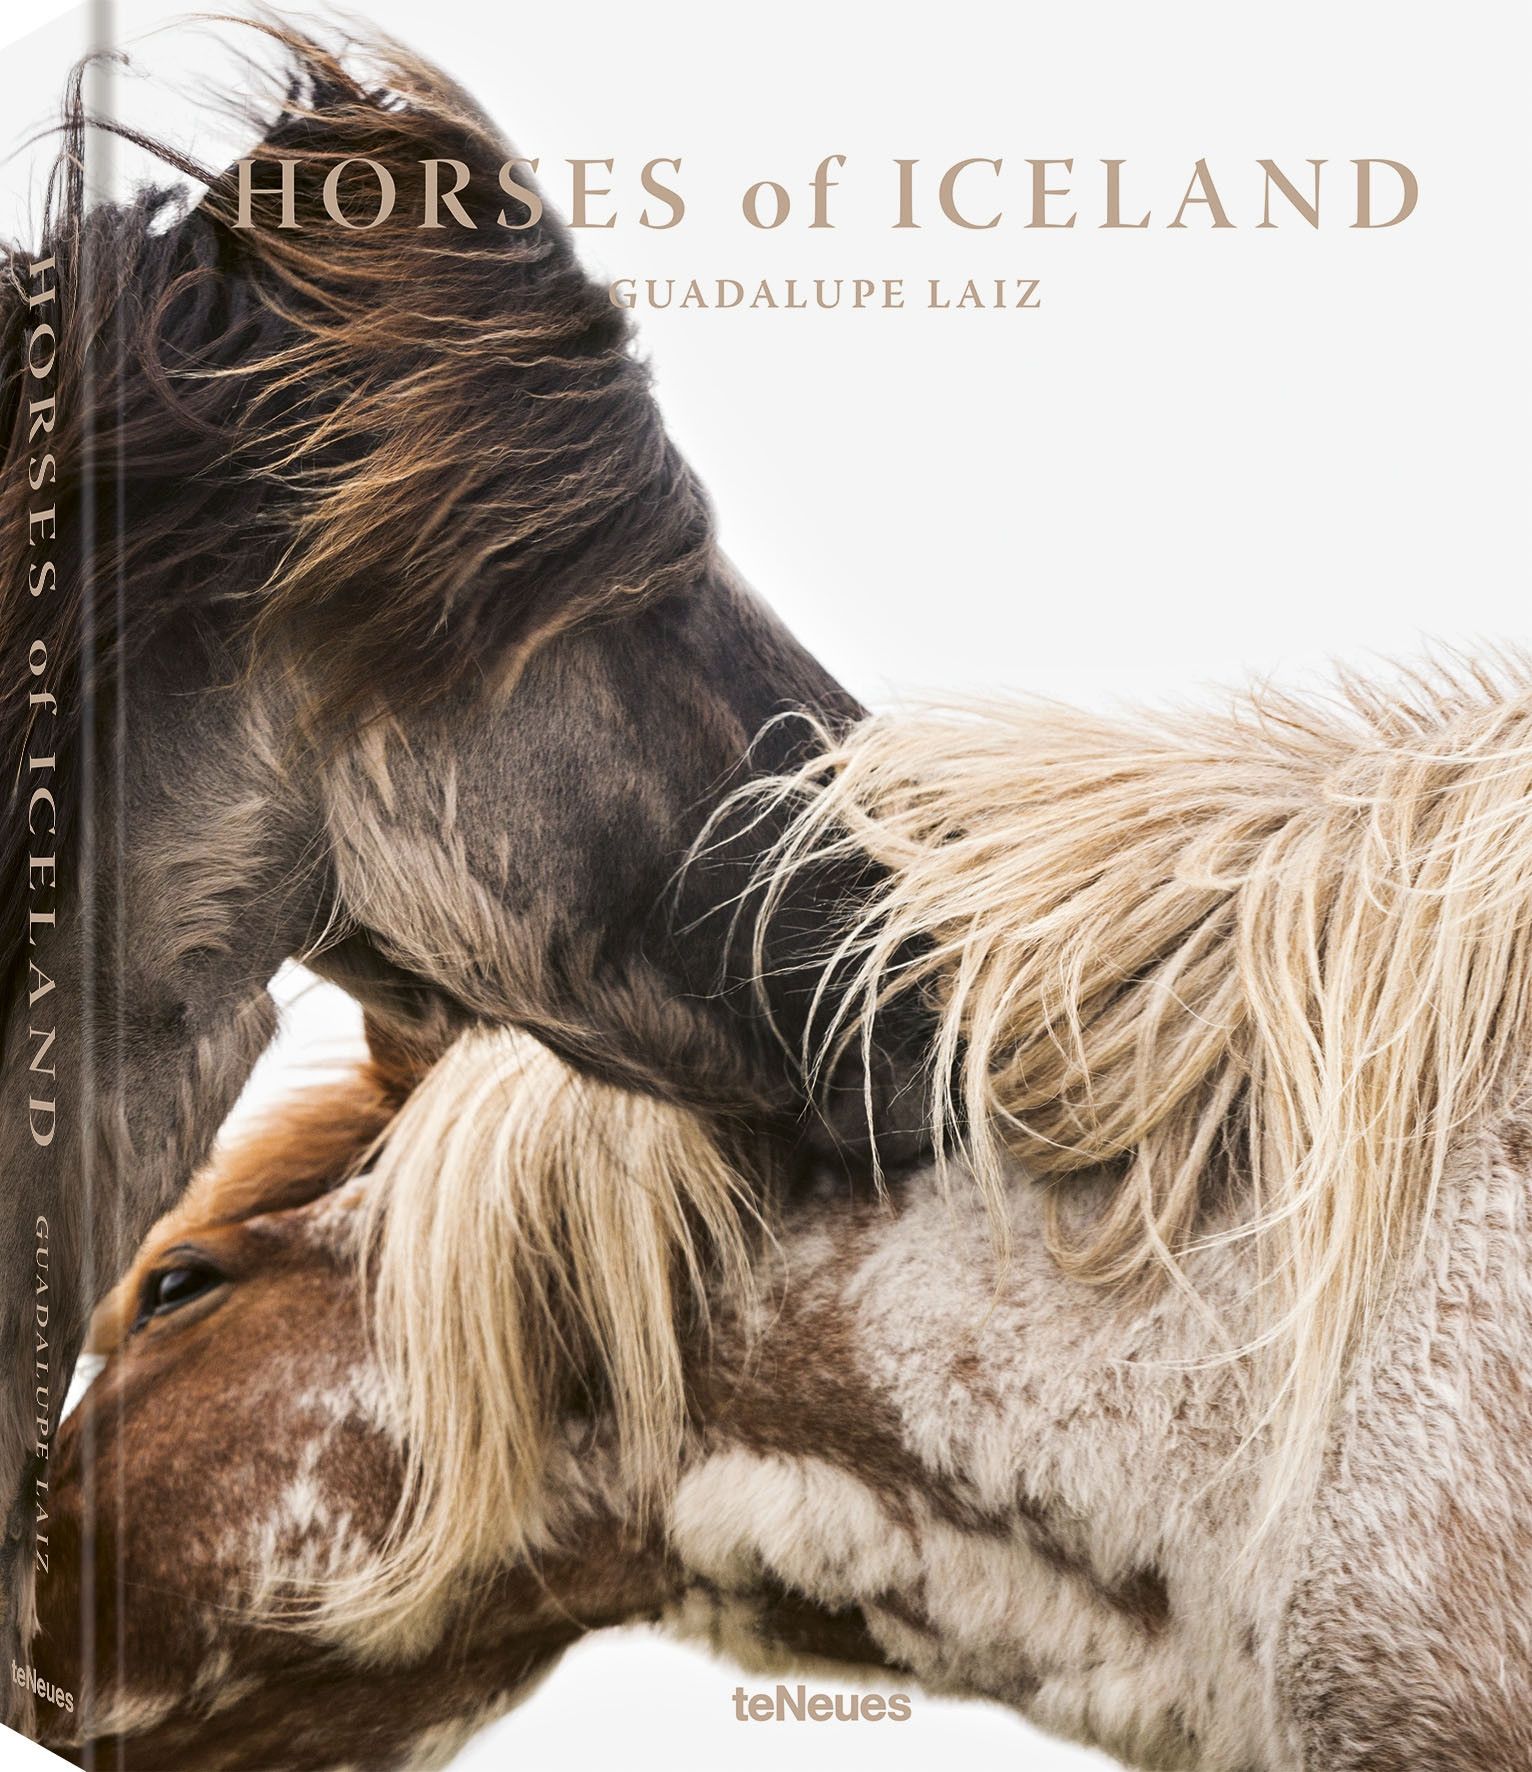 horses of iceland book front cover 